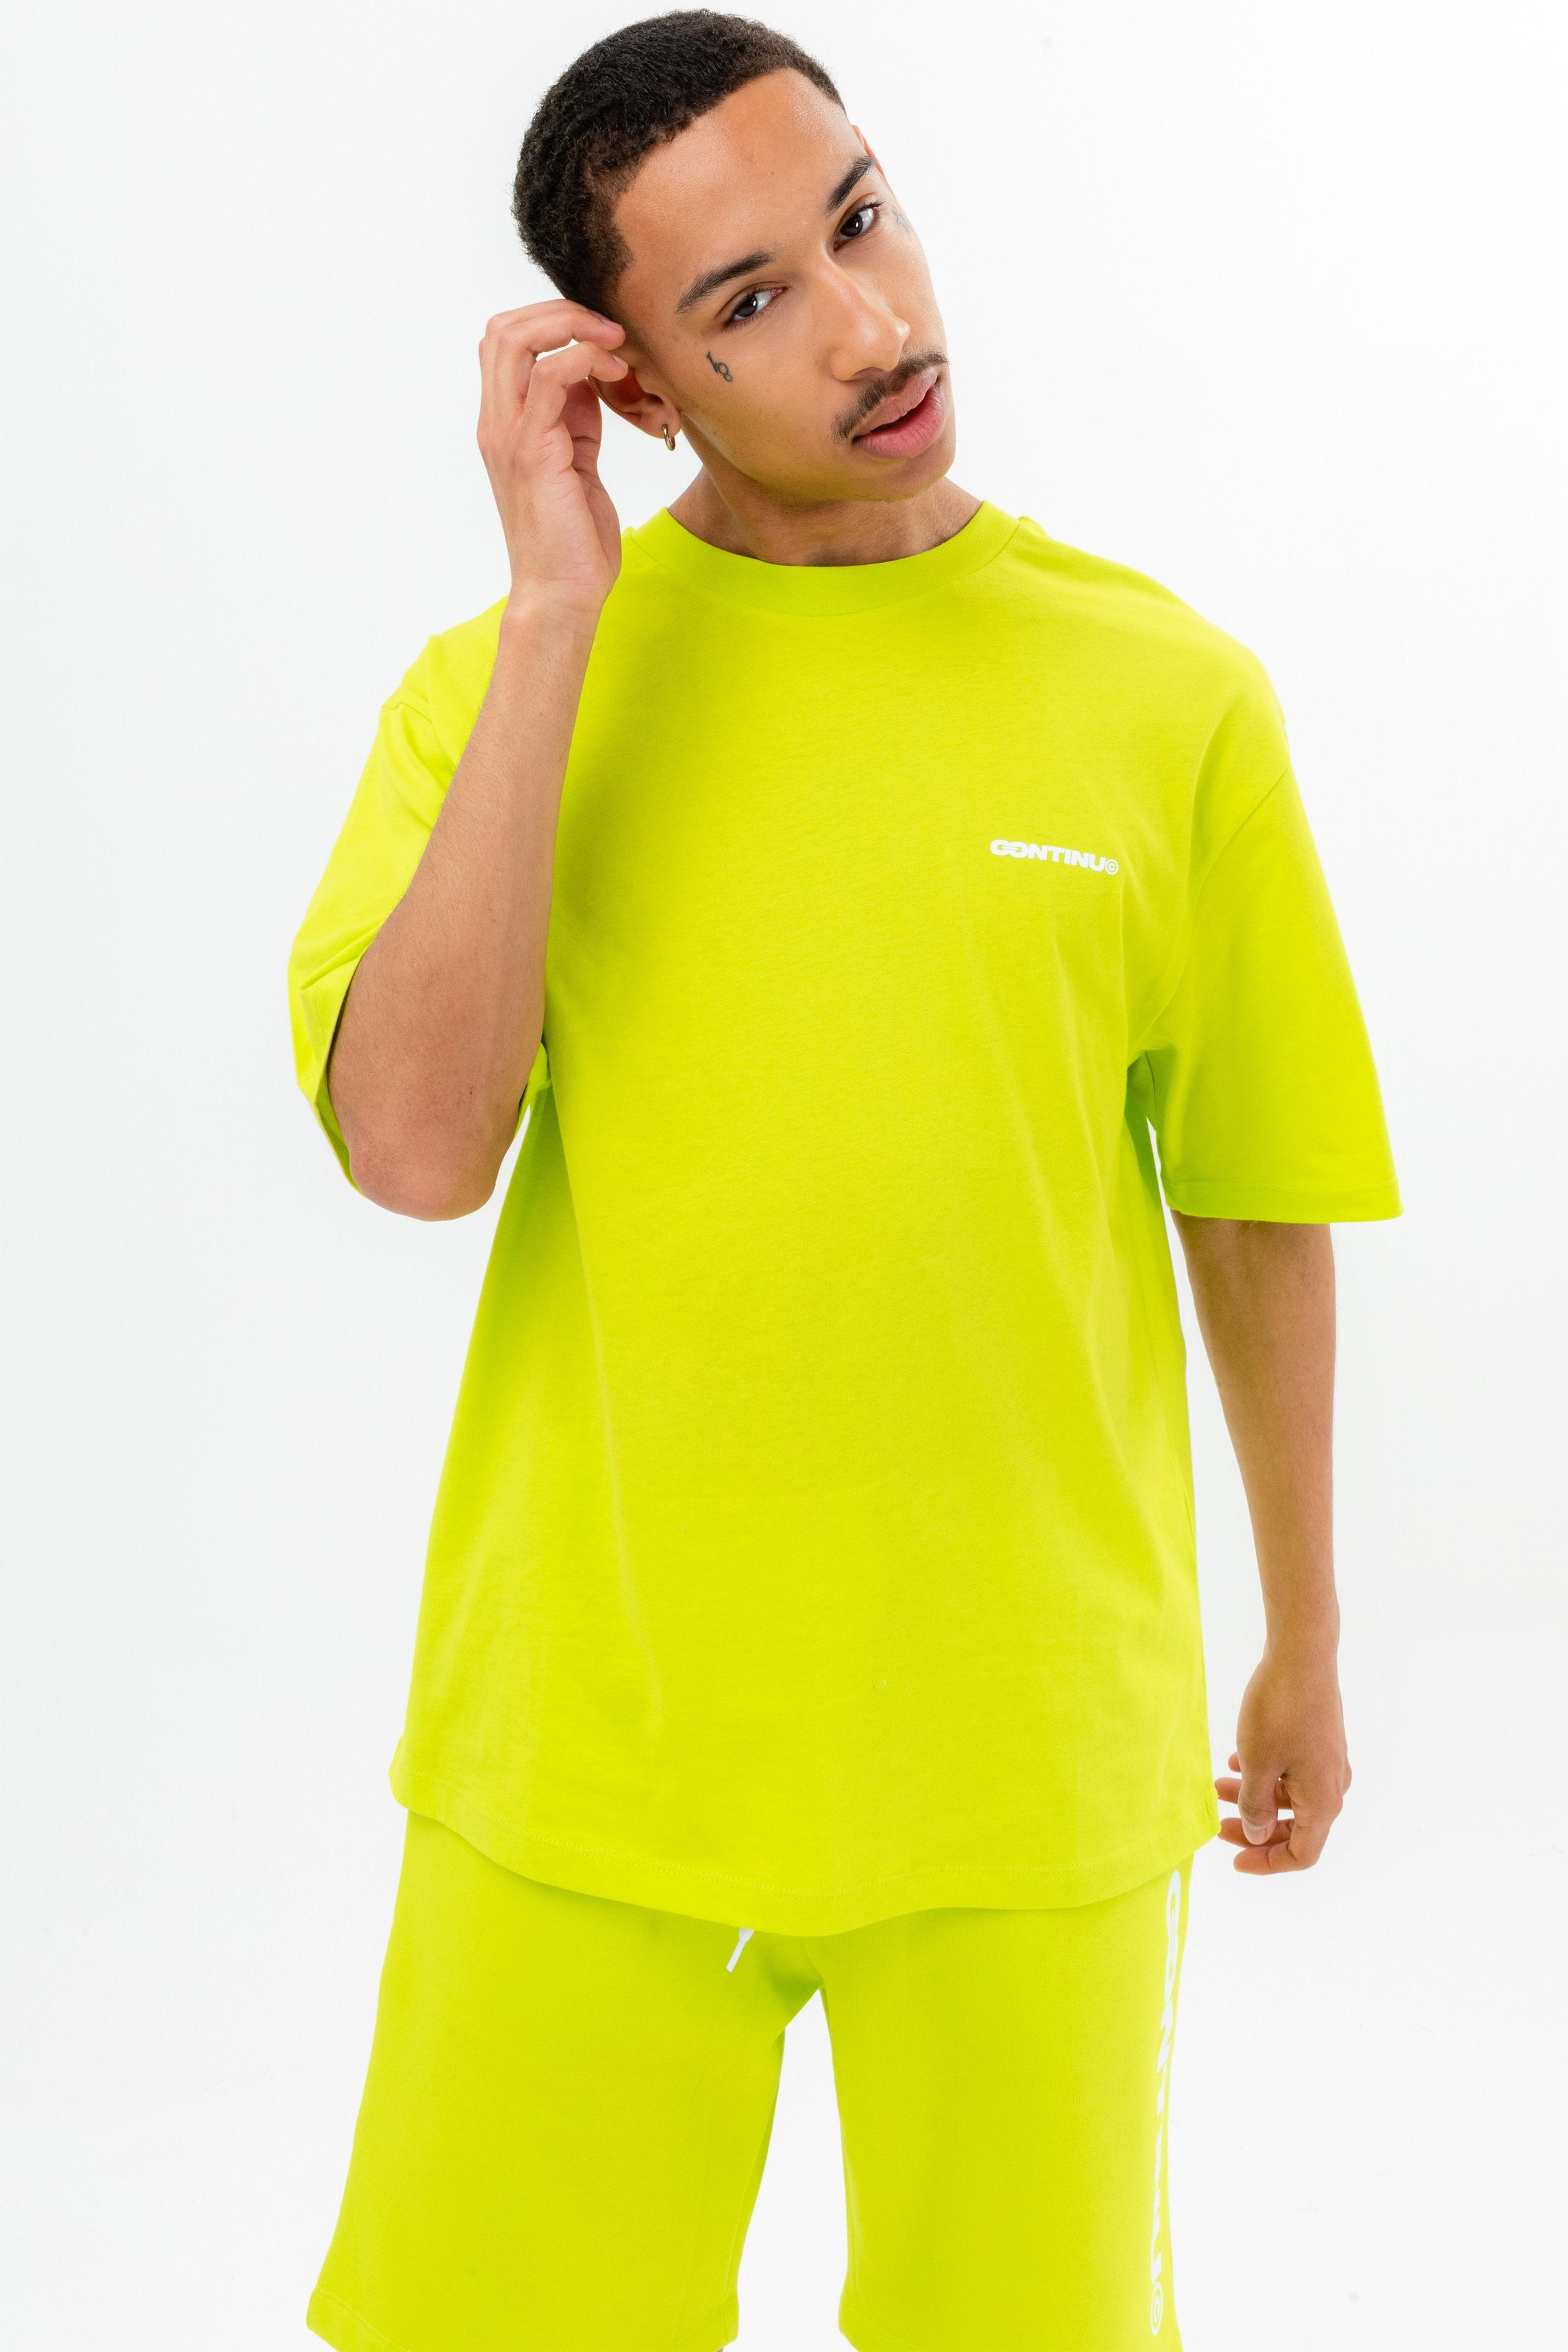 Alternate View 2 of CONTINU8 NEON GREEN OVERSIZED T-SHIRT